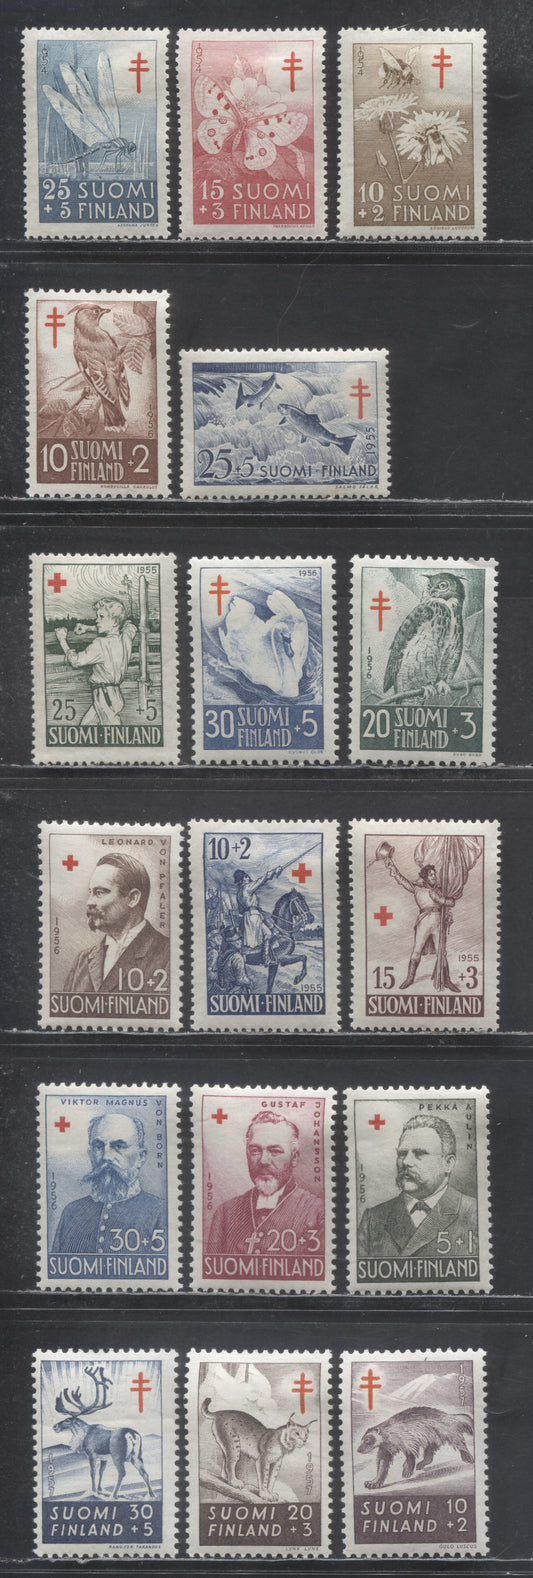 Lot 419 Finland SC#B126/B144 1954-1957 Semi Postals, 17 VFOG Singles, Click on Listing to See ALL Pictures, Estimated Value $26